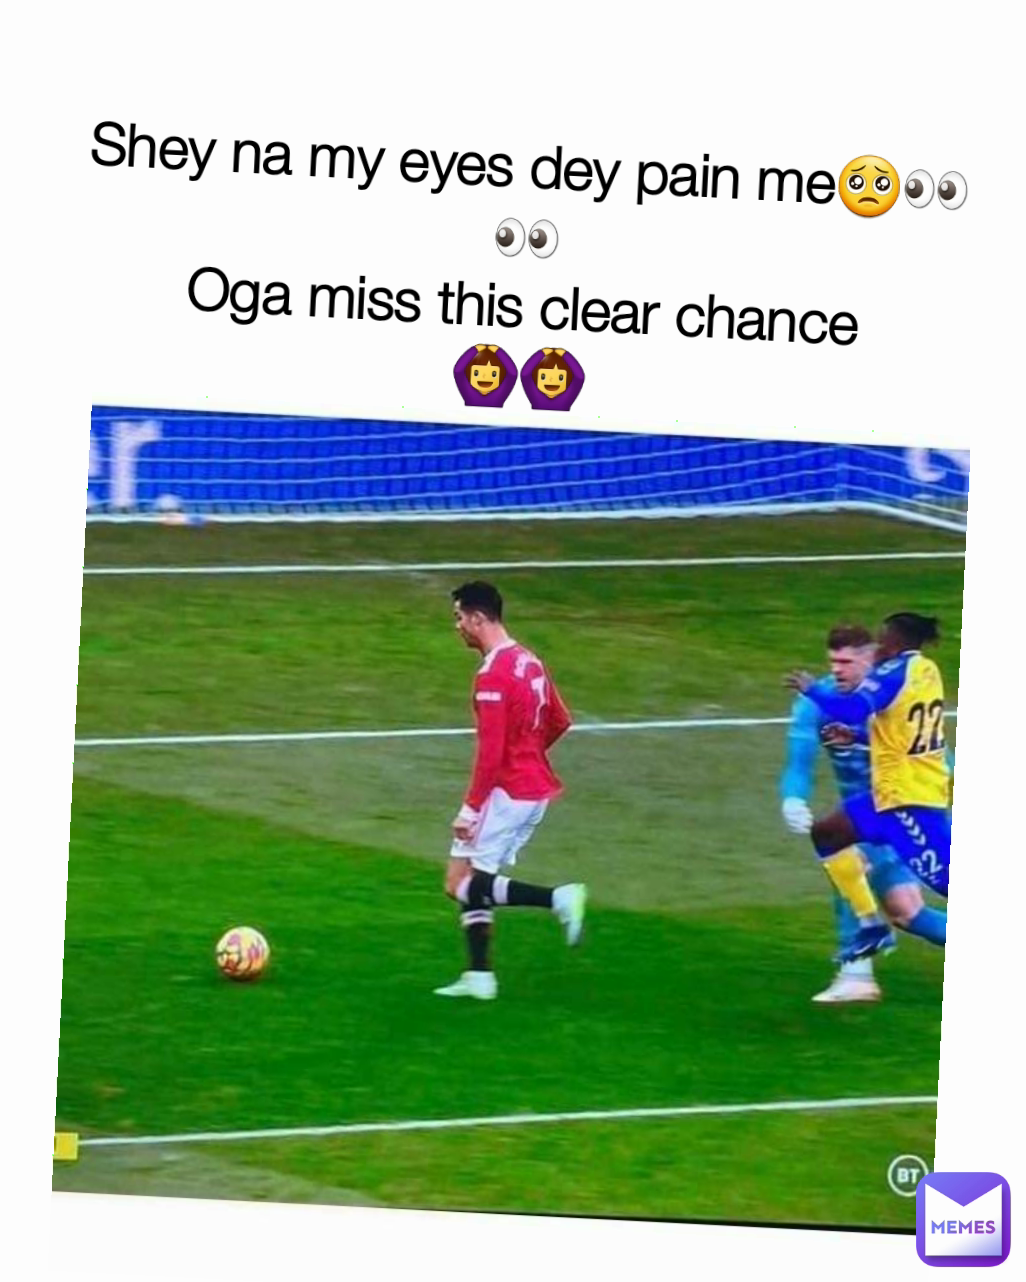 Shey na my eyes dey pain me🥺👀👀
Oga miss this clear chance
🙆‍♀️🙆‍♀️